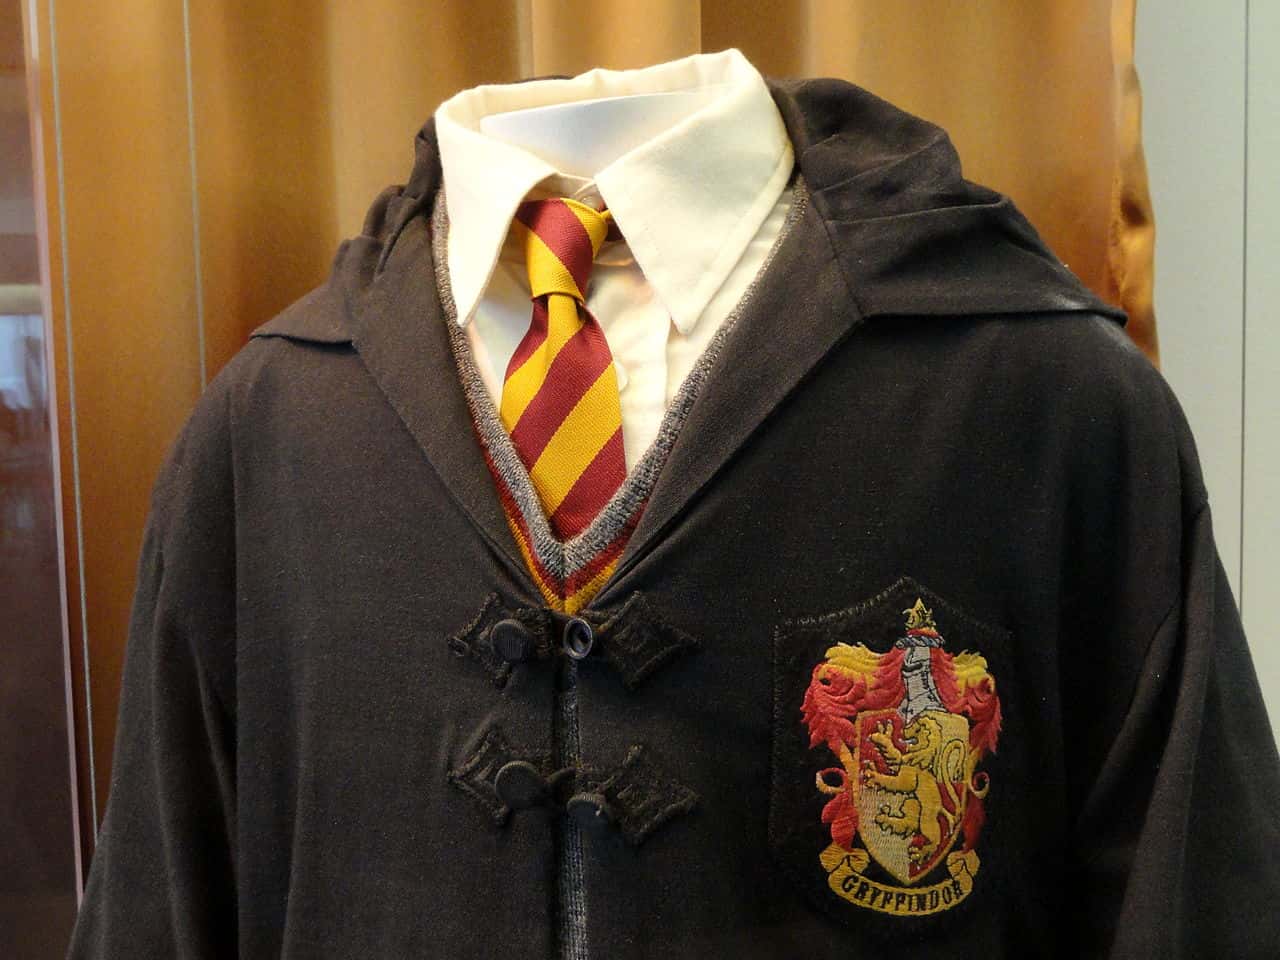 20 Brave Facts About the House of Gryffindor